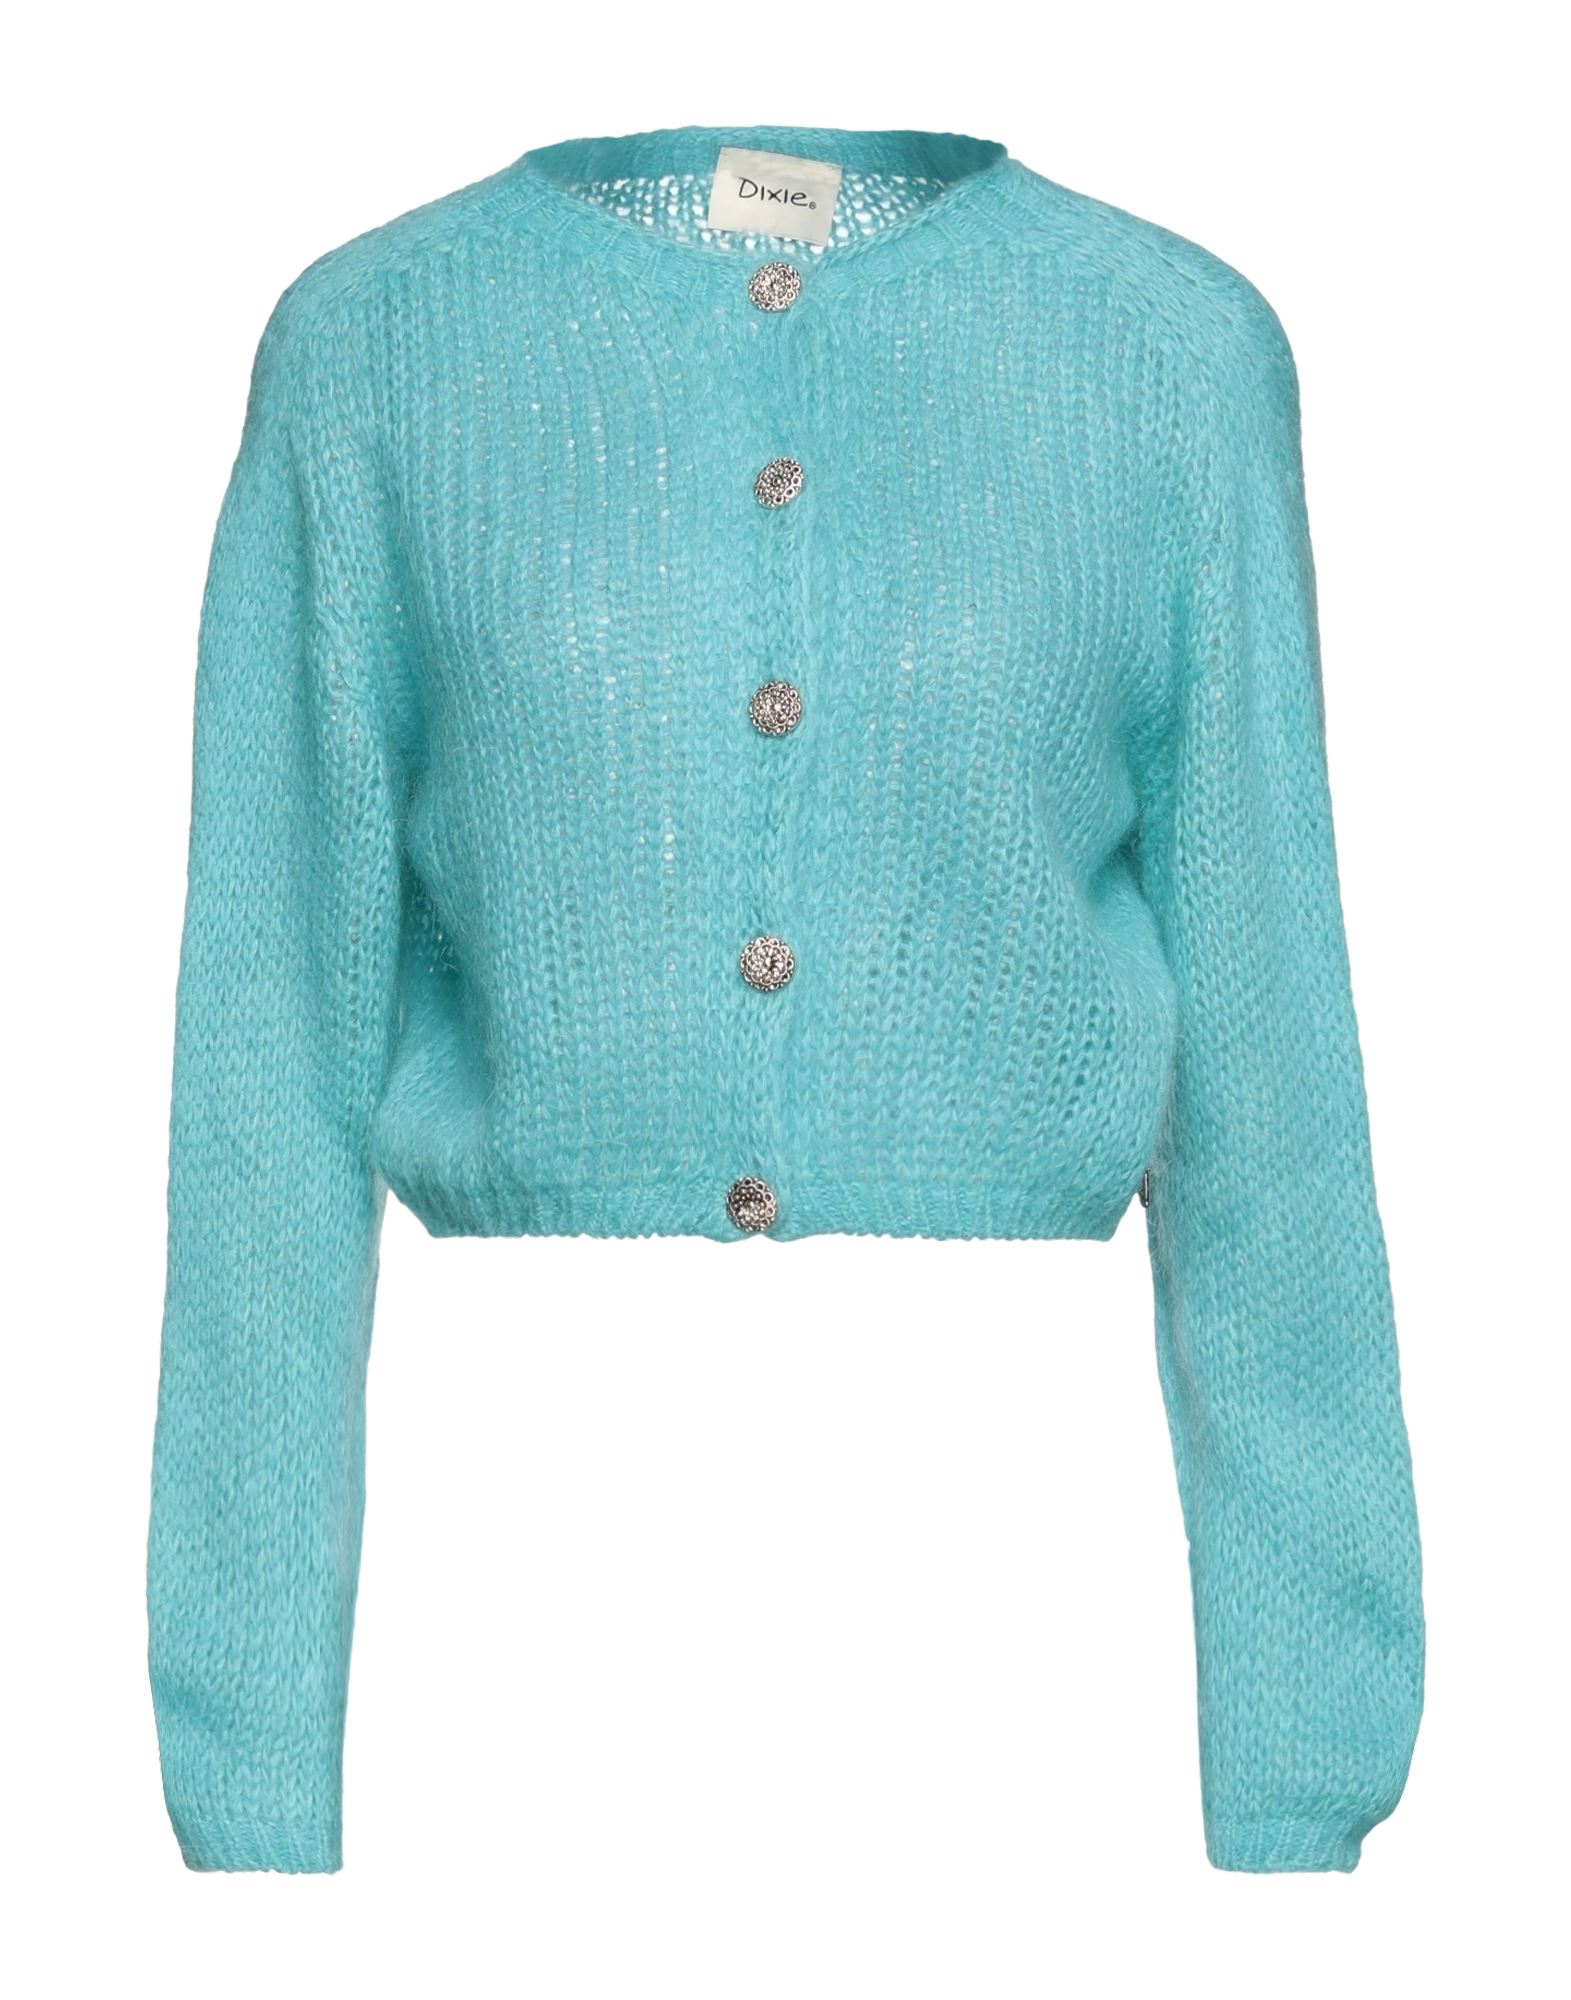 Dixie Cardigans In Turquoise